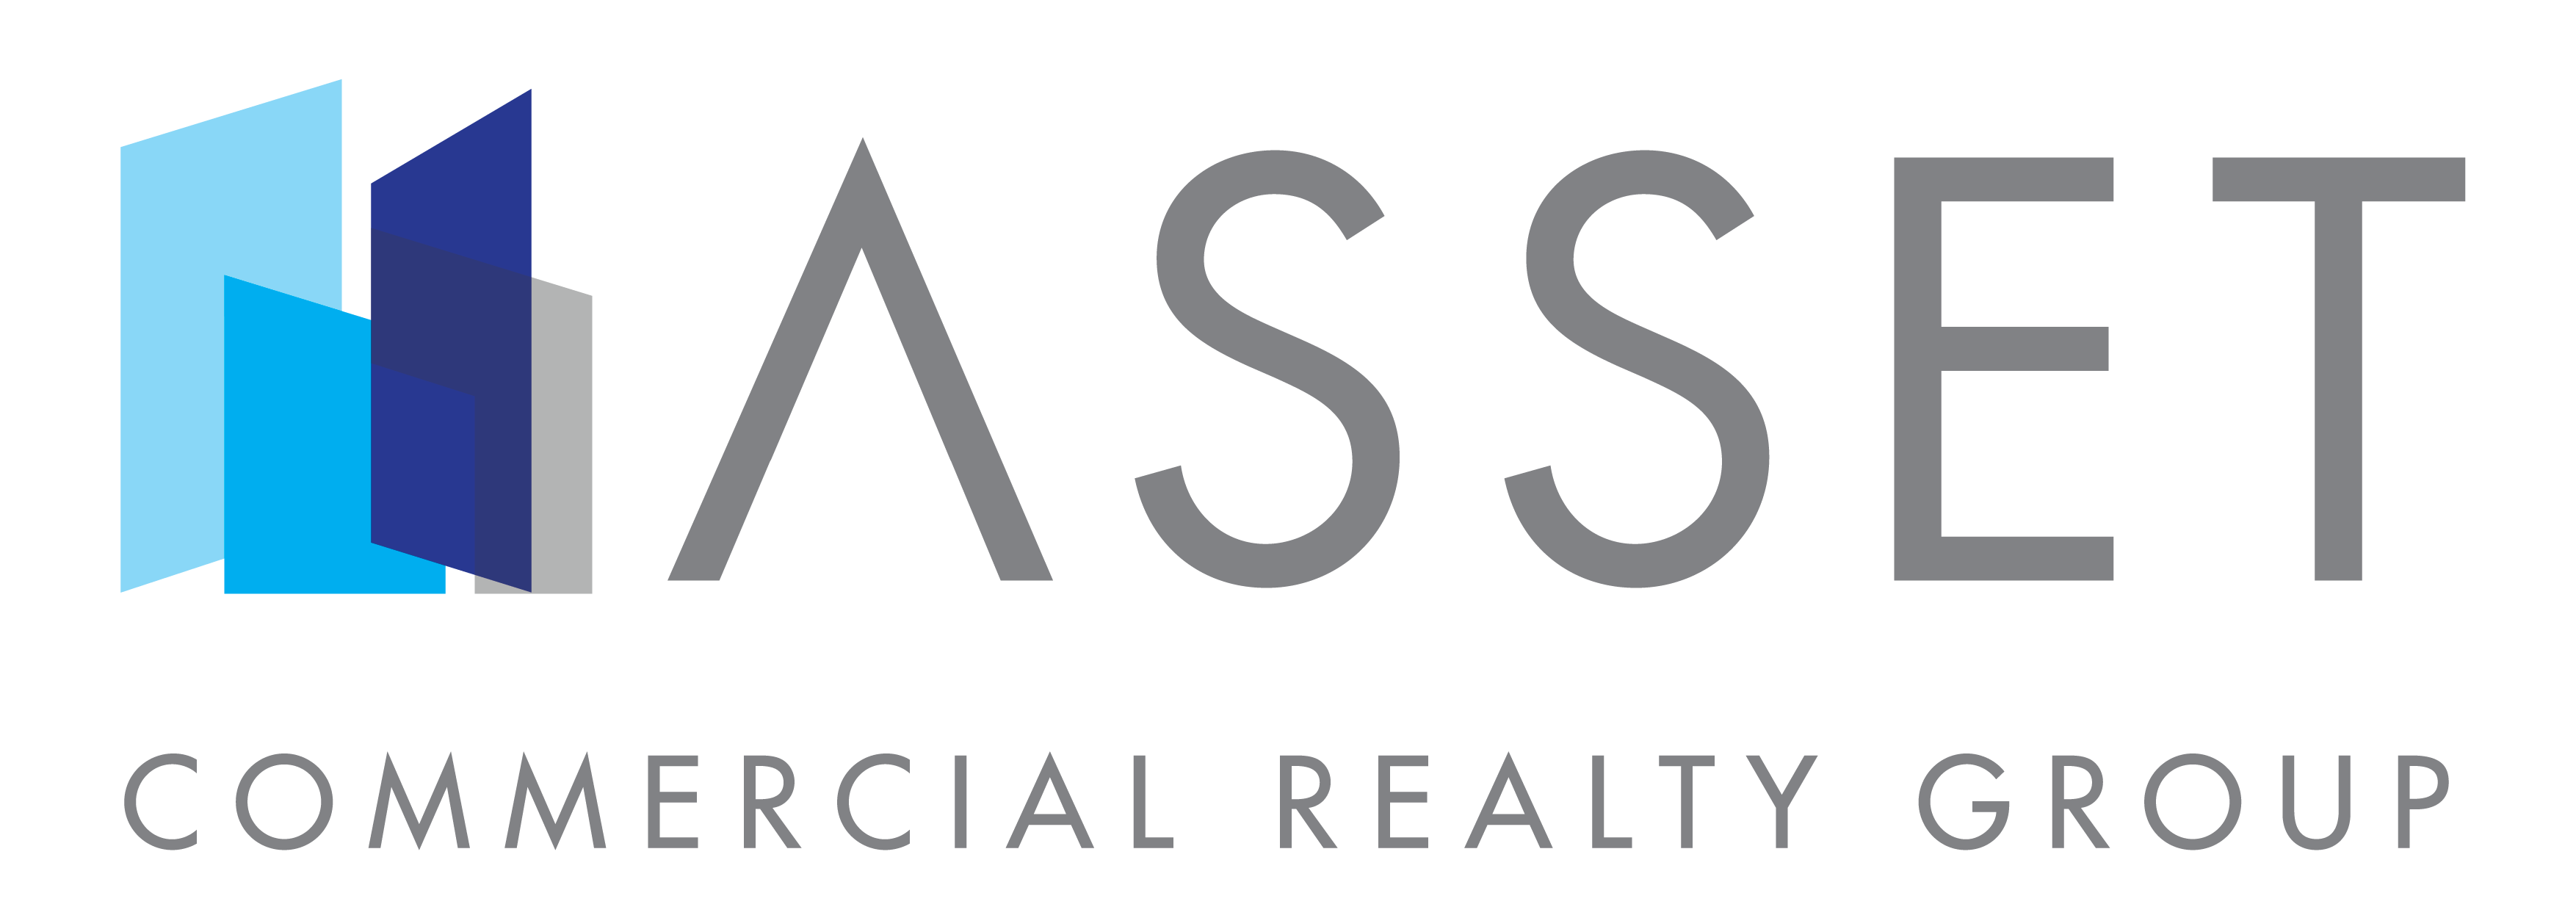 Asset Commercial Realty Group Logo